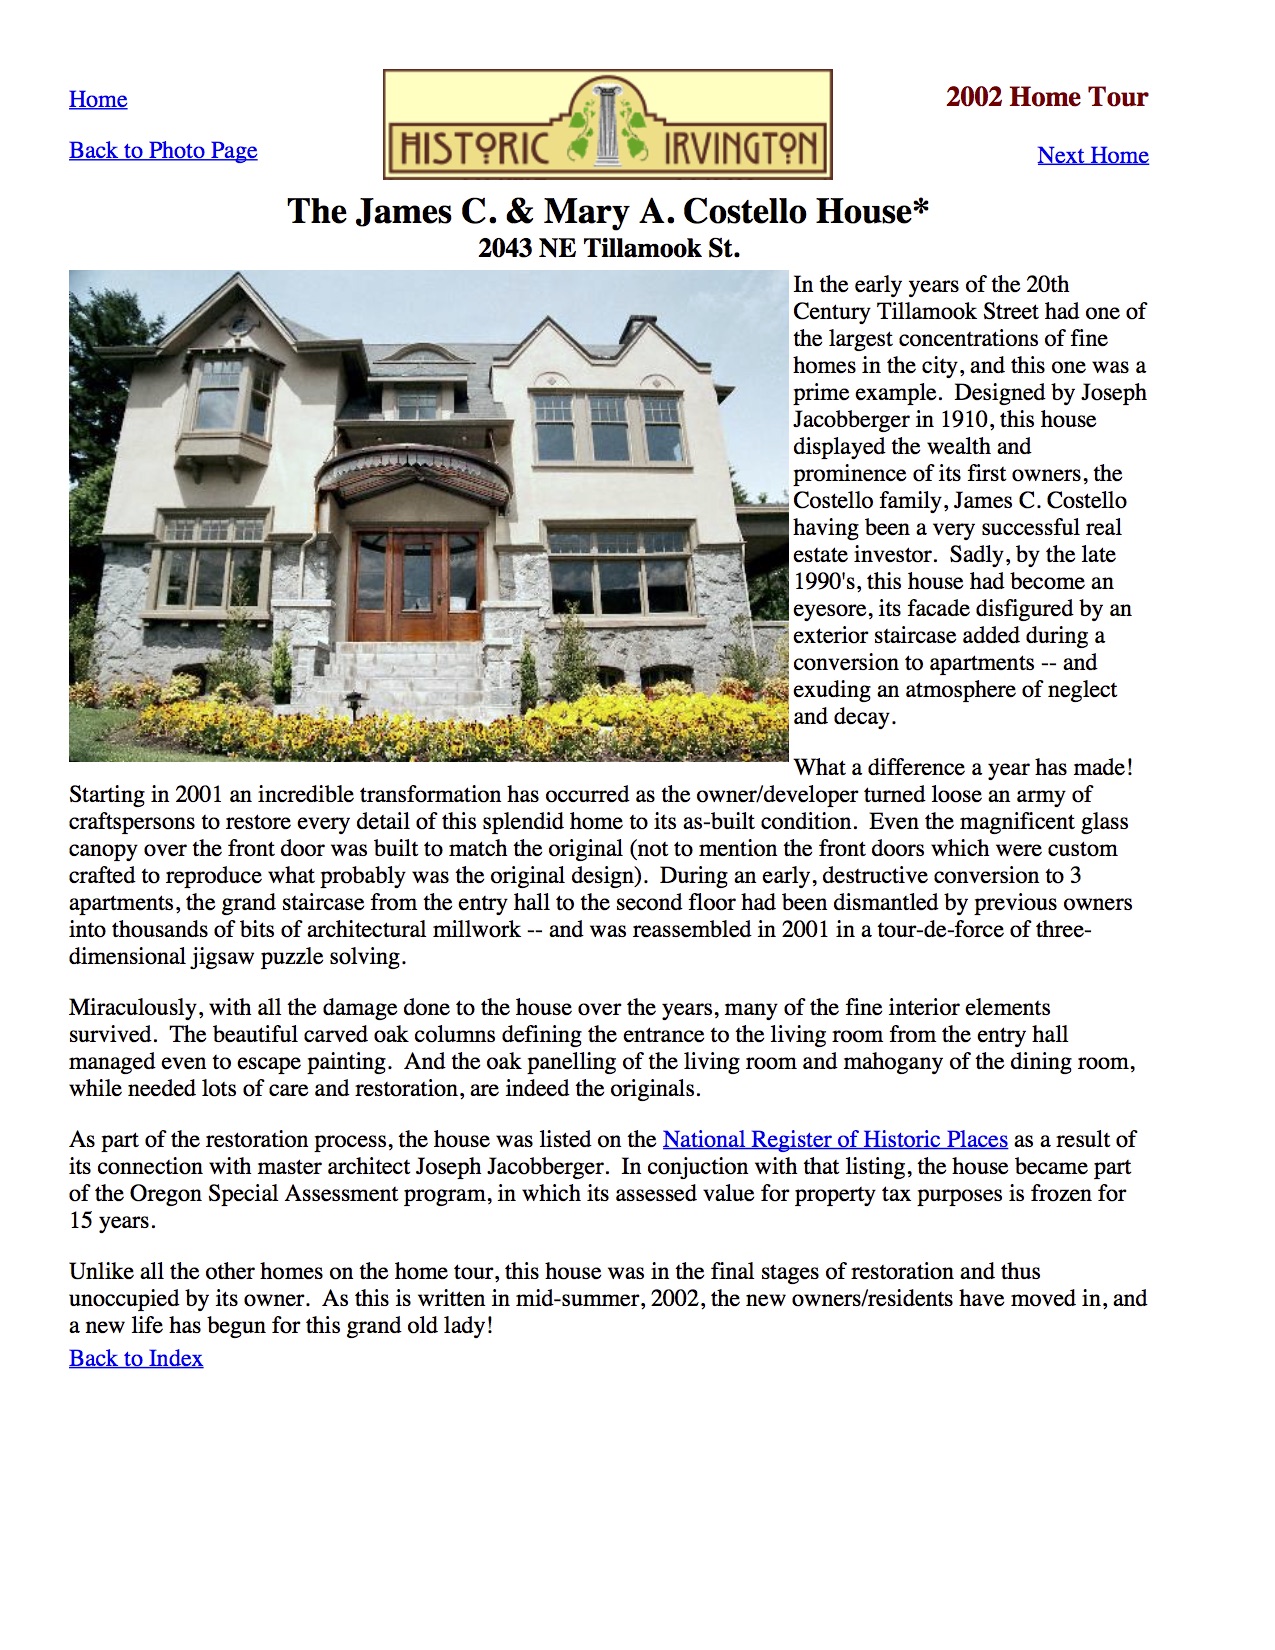 About the Costello House